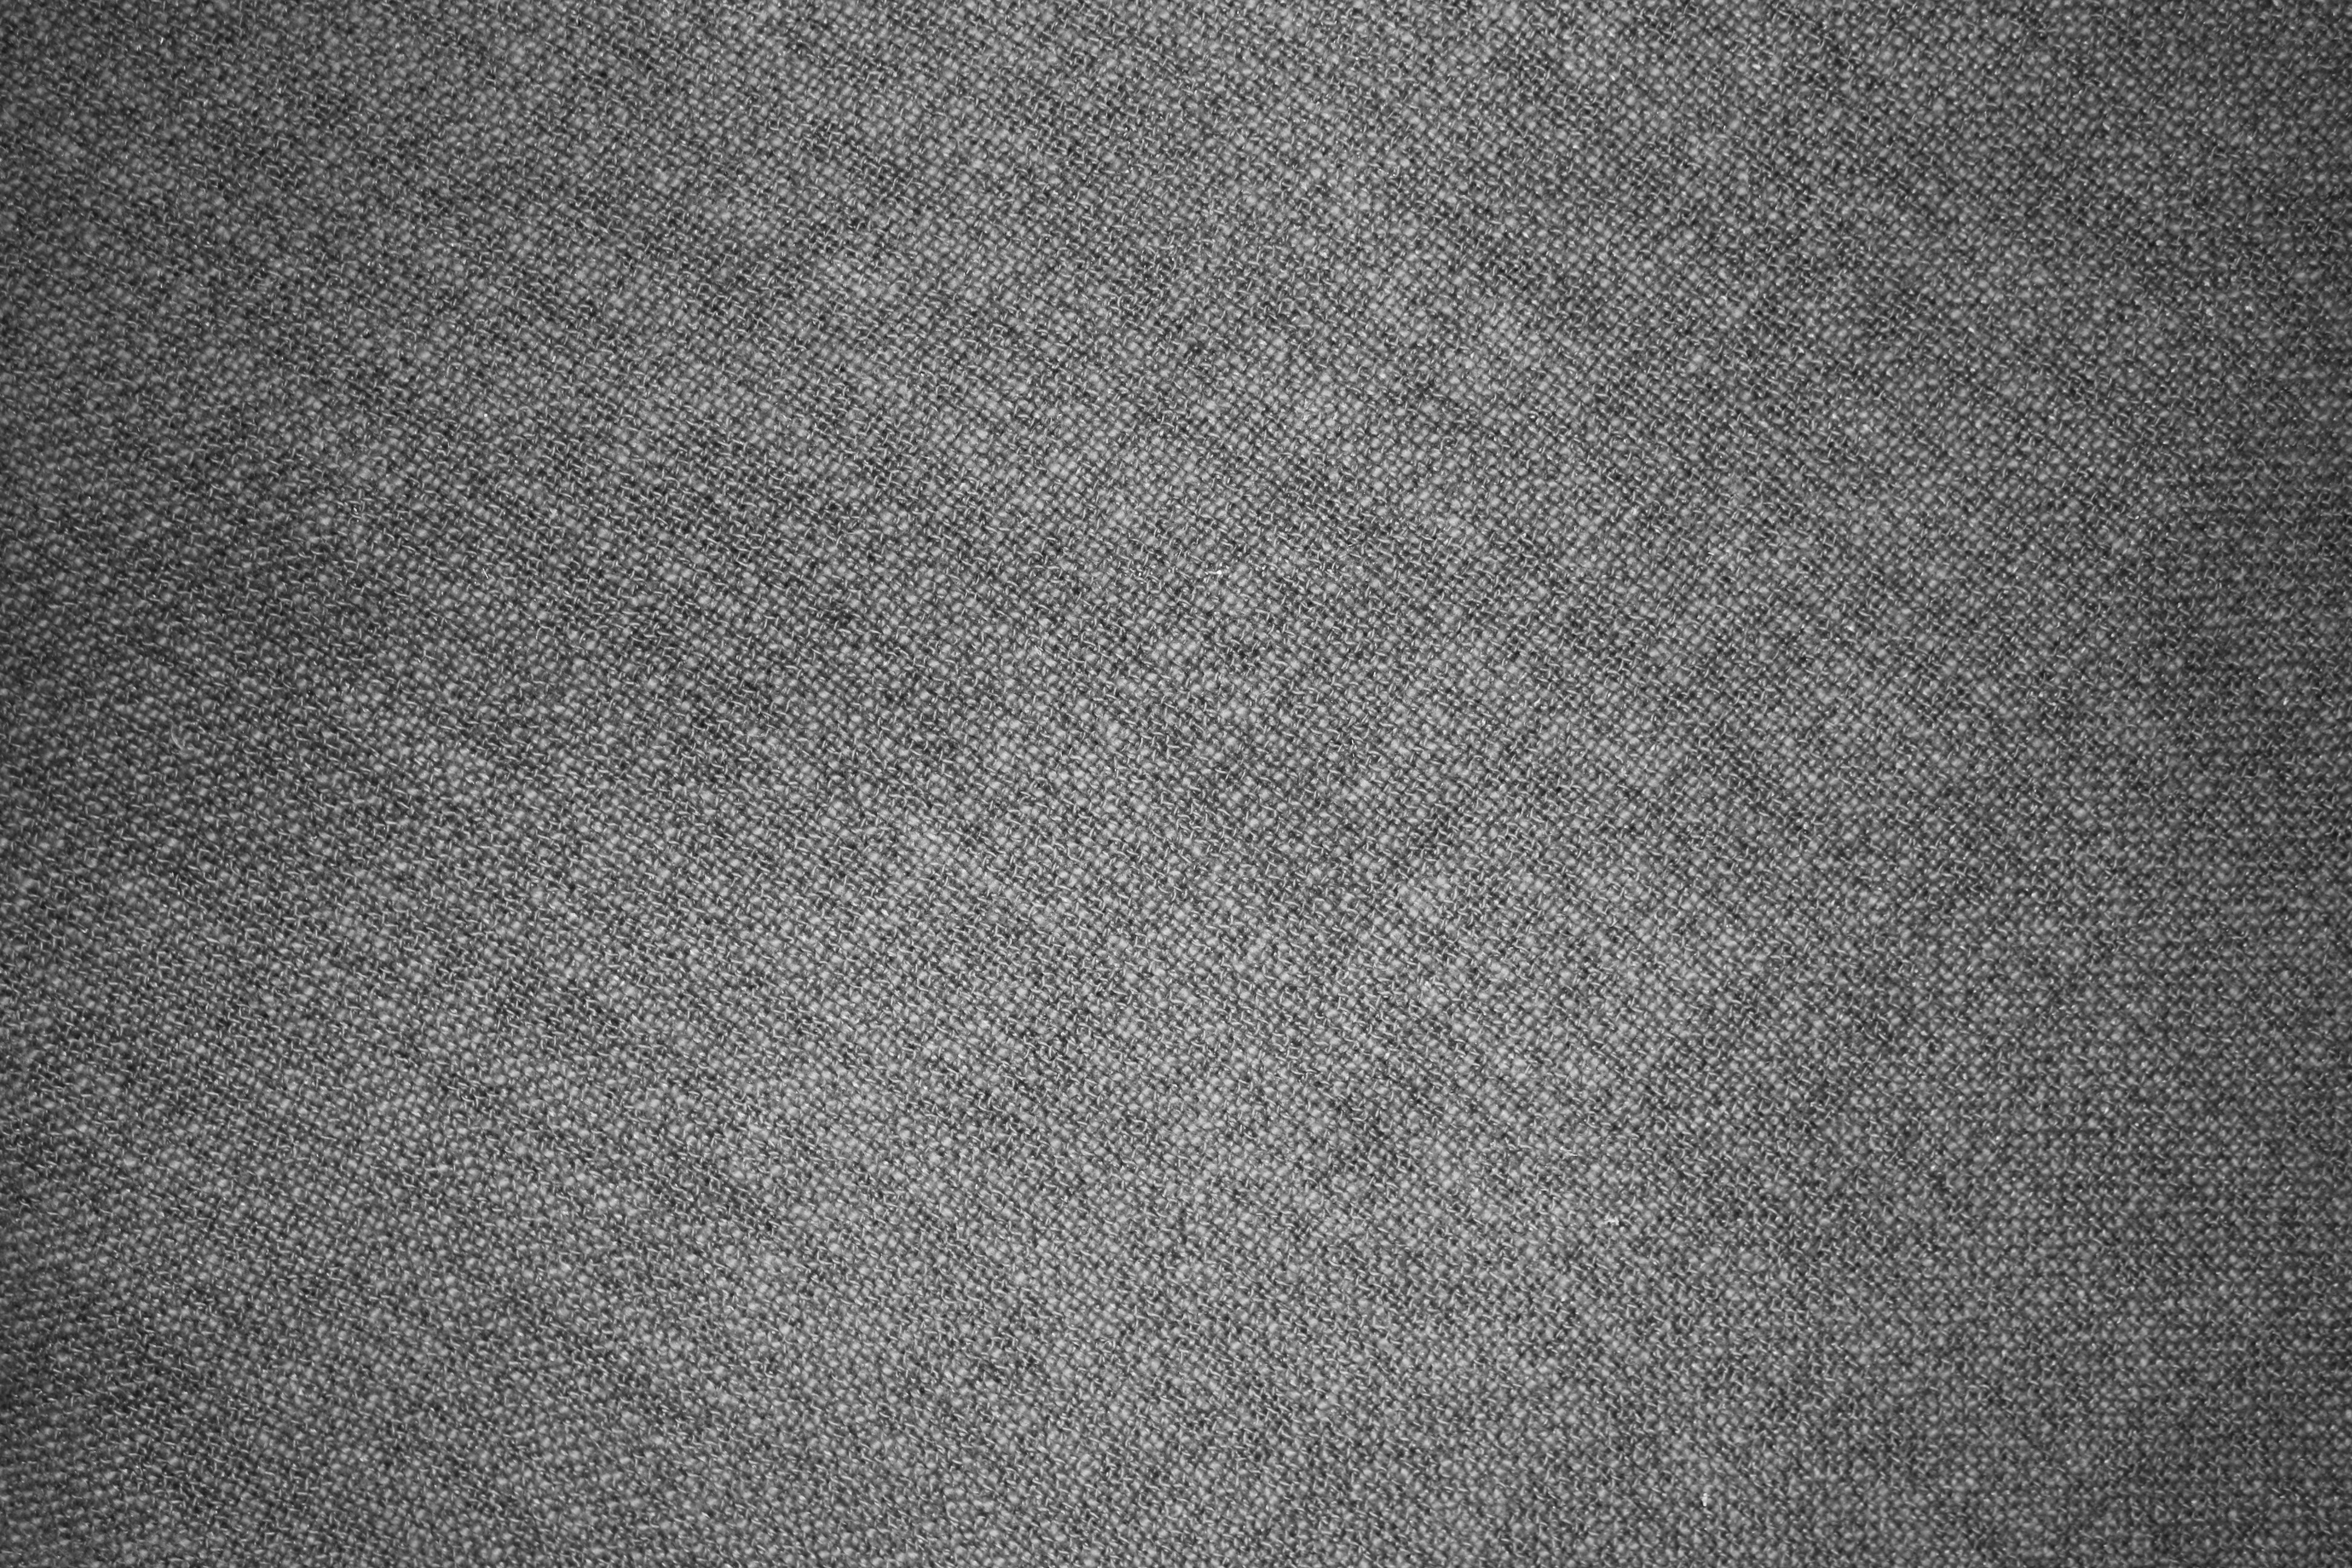 Gray Fabric Texture   High Resolution Photo   Dimensions 3888 3888x2592